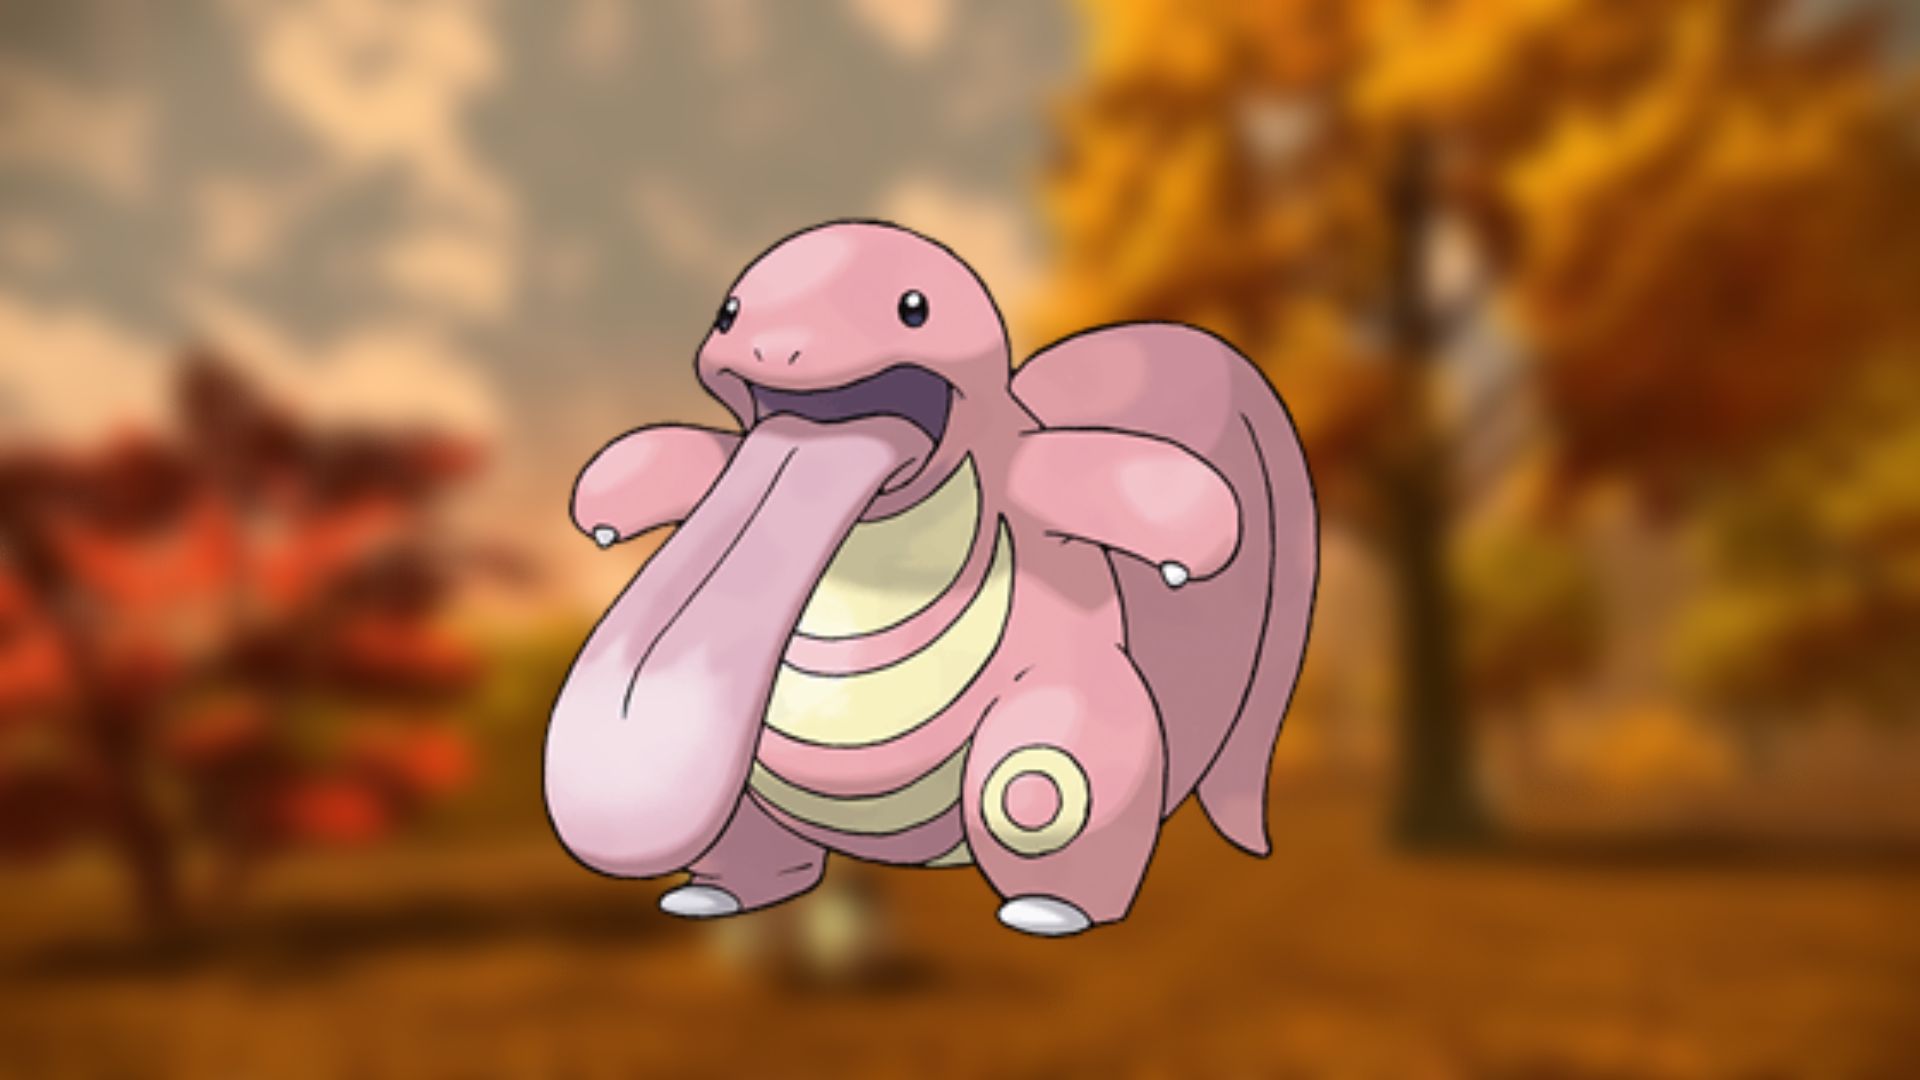 Cutest Pokémon - Lickitung. Its official artwork is over blurred scenery from Pokémon Legends: Arceus.